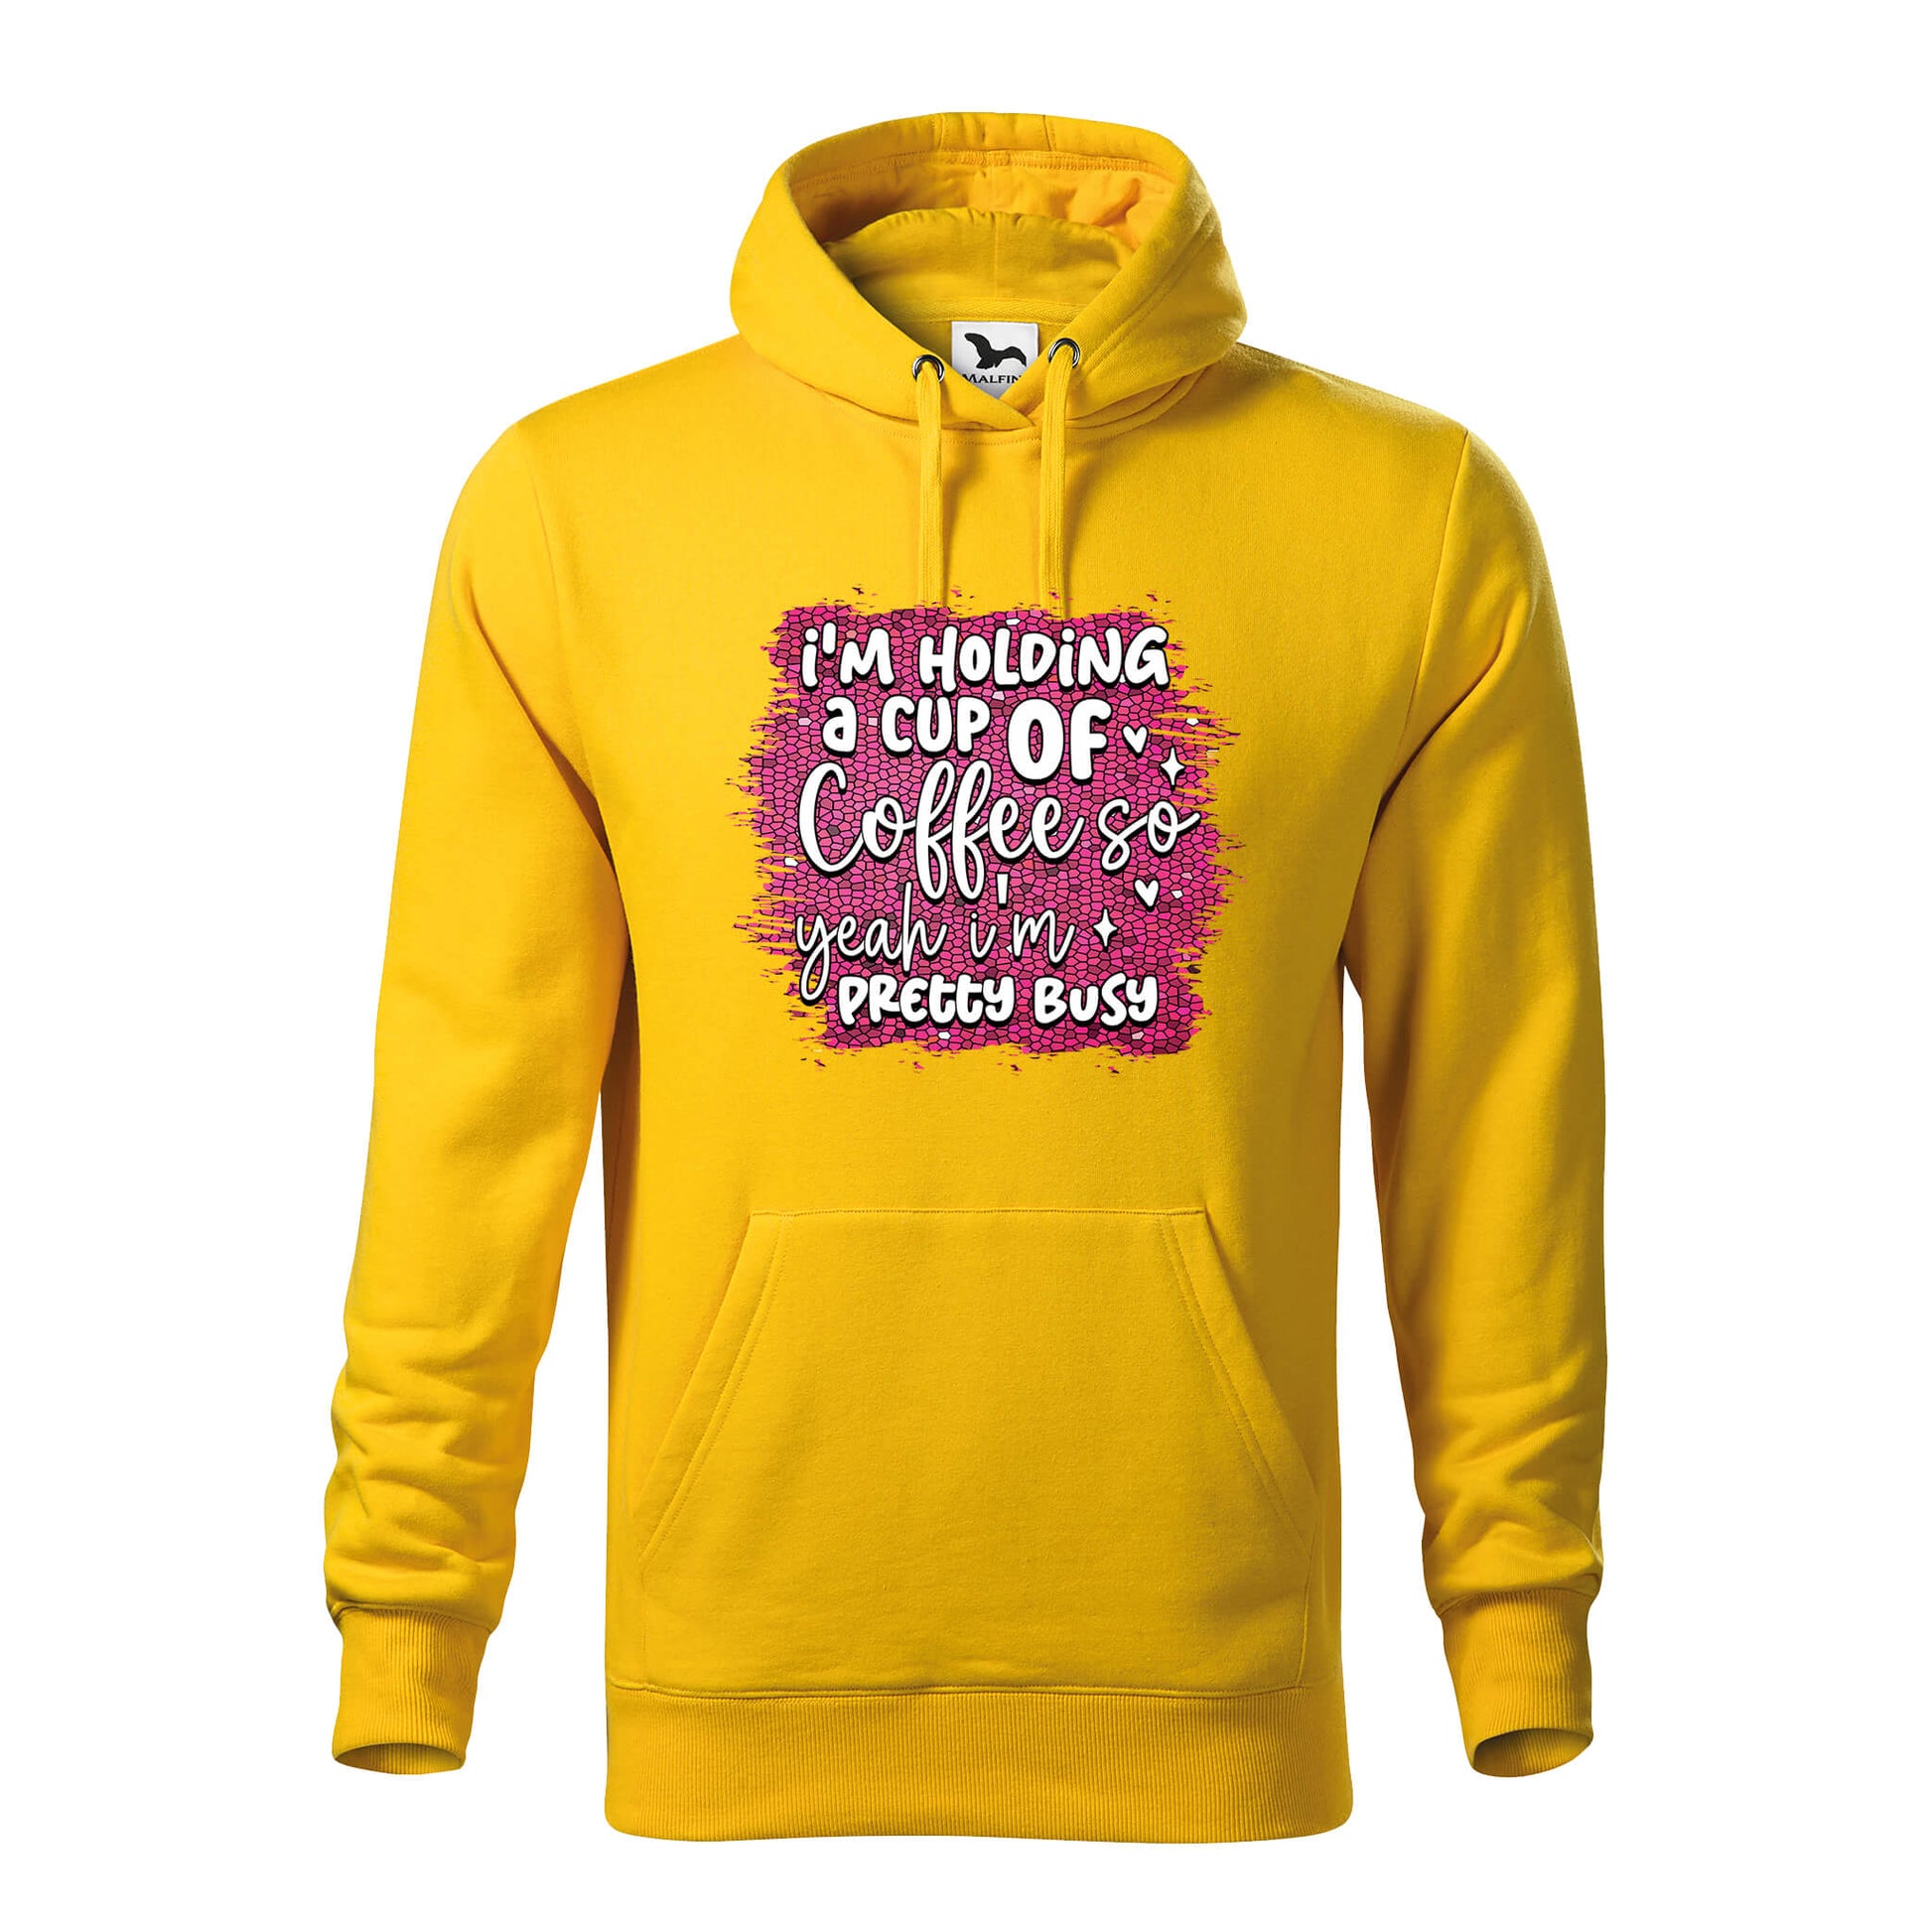 Im holding a cup of coffee hoodie - rvdesignprint